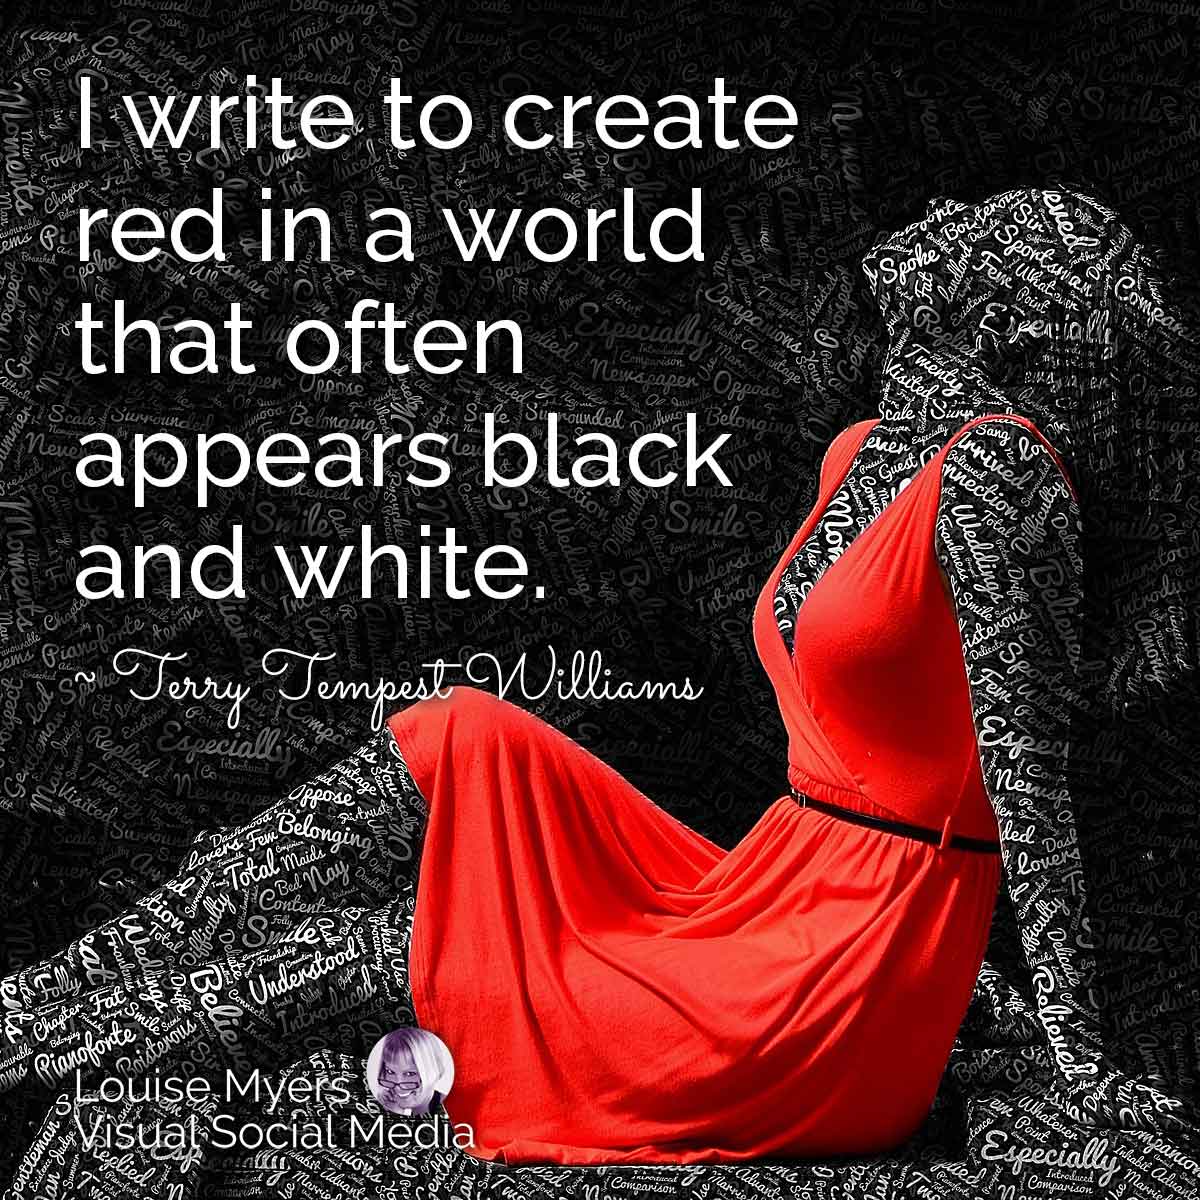 black and white mannequine with red dress has quote, I write to create red in a world that often appears black and white.